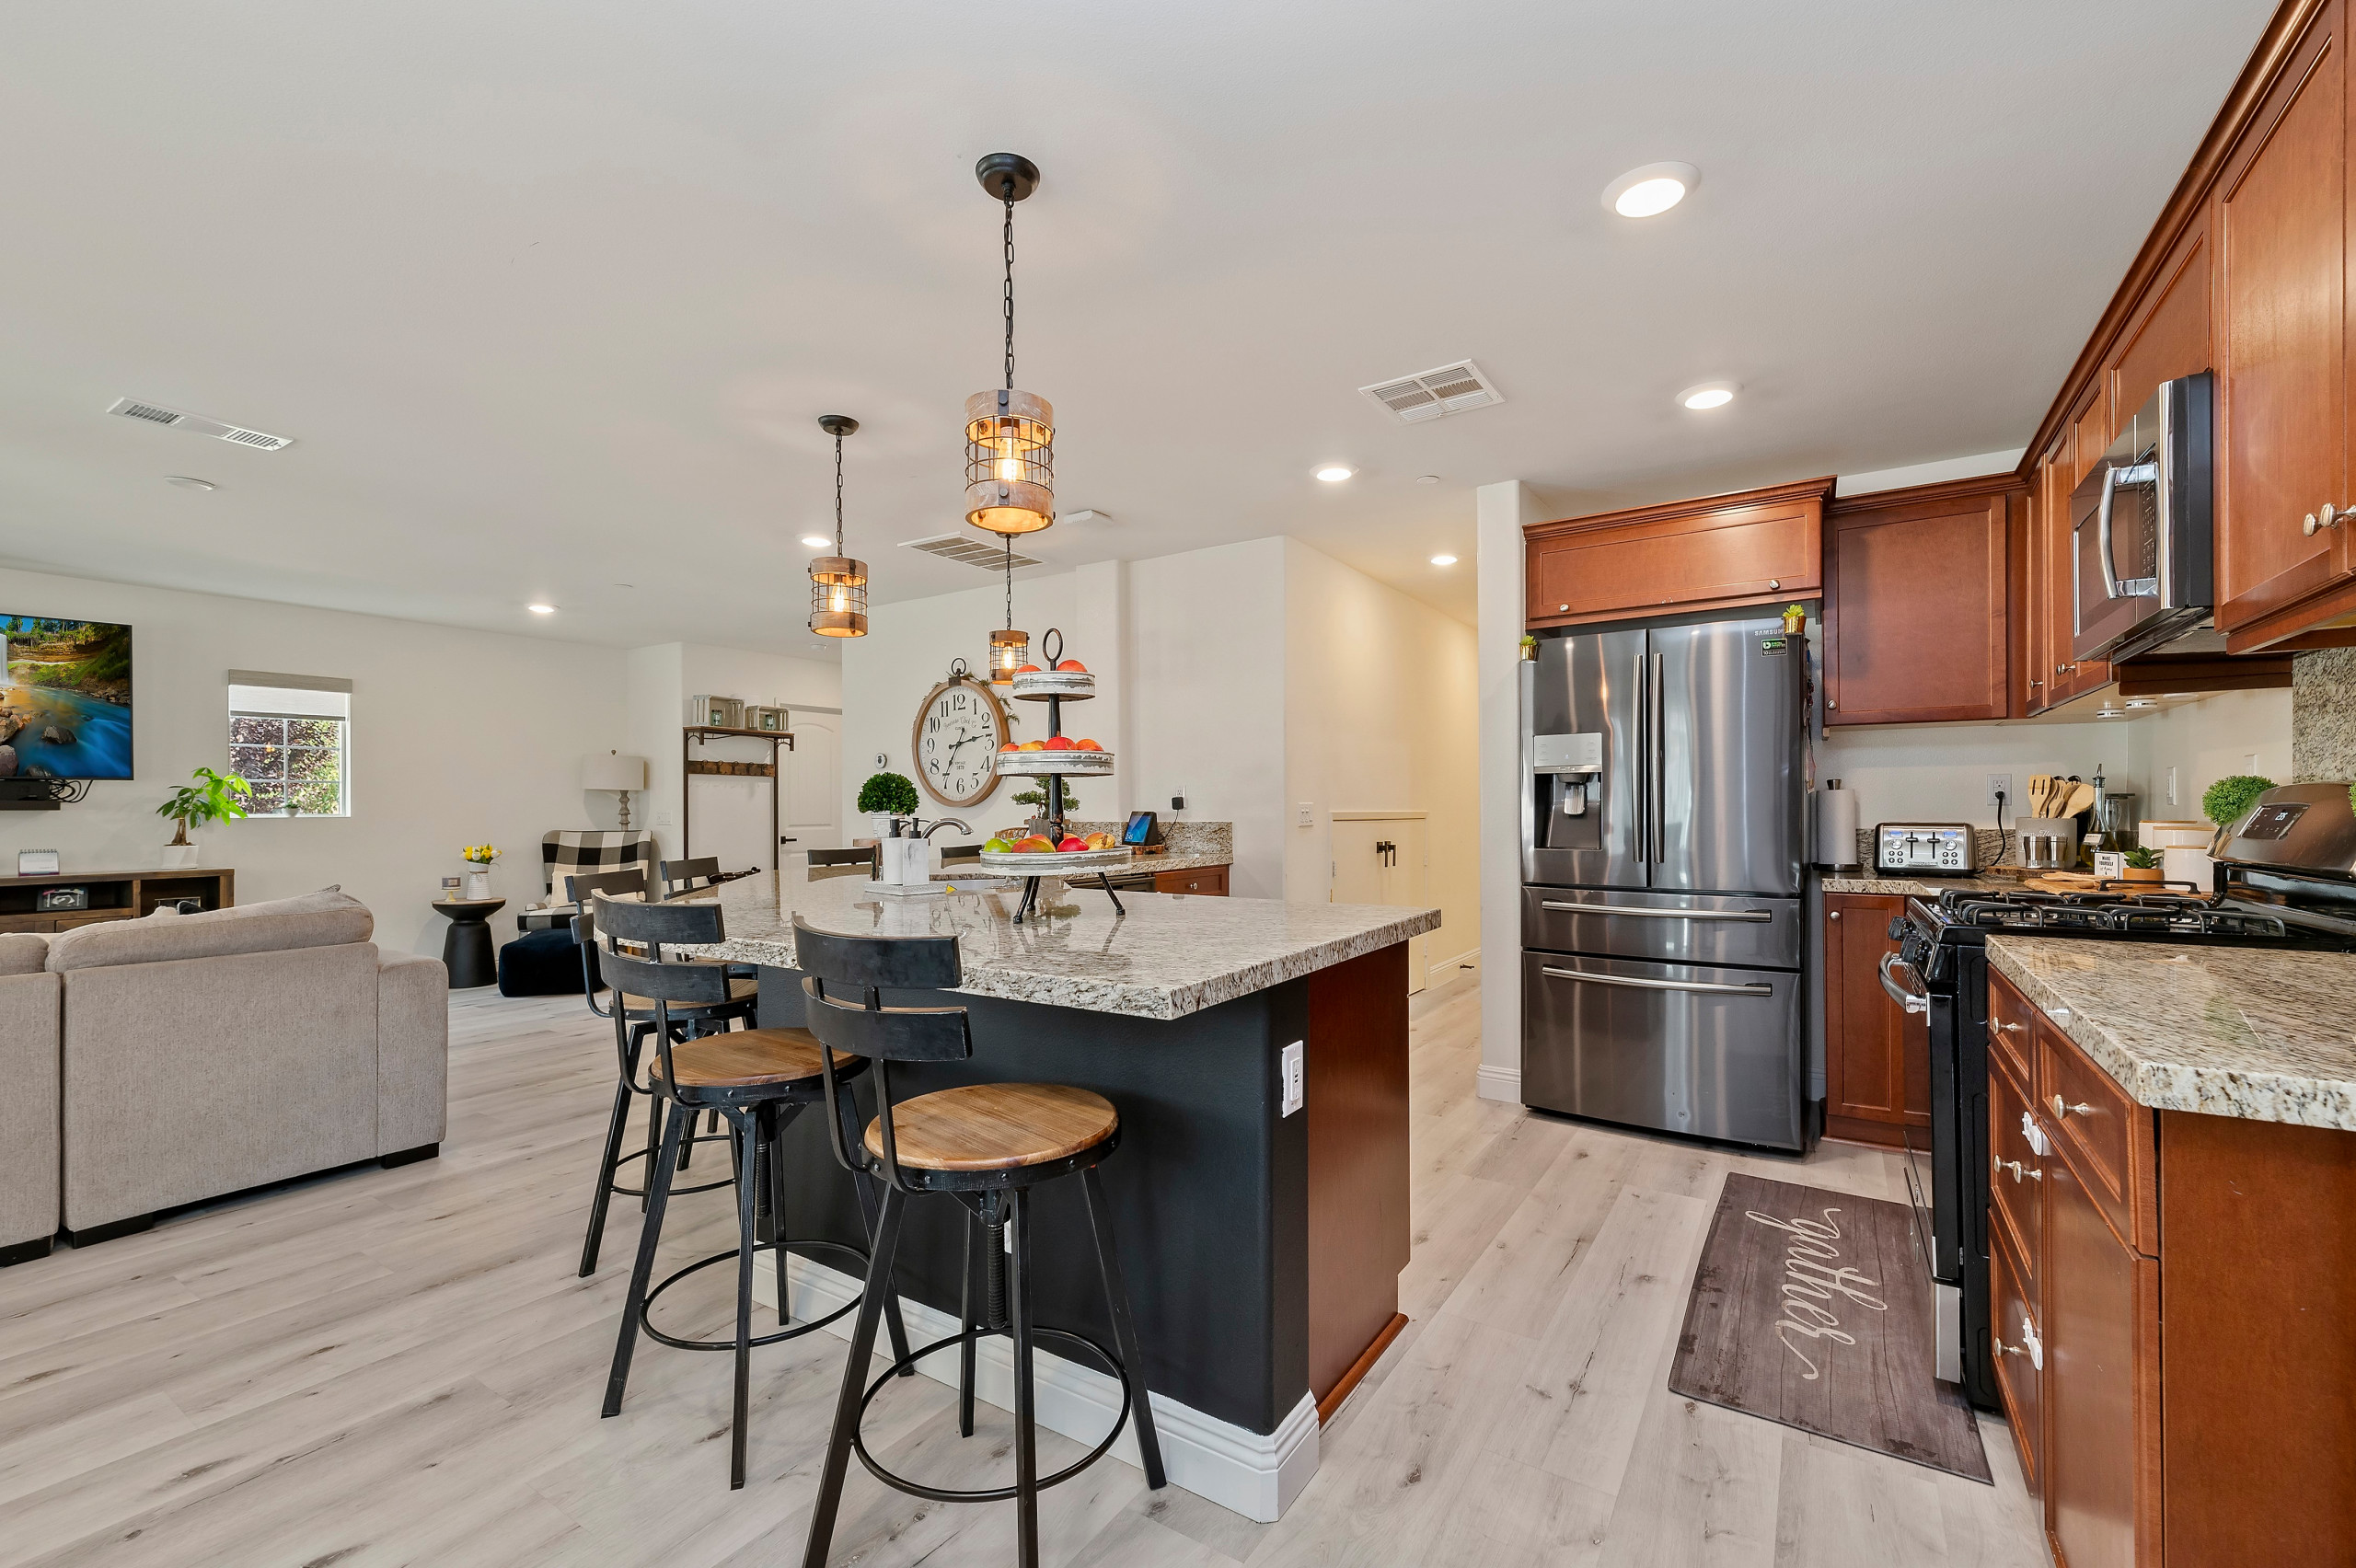 Open Concept Kitchen / Dining / Living Space - Moreno Valley, CA